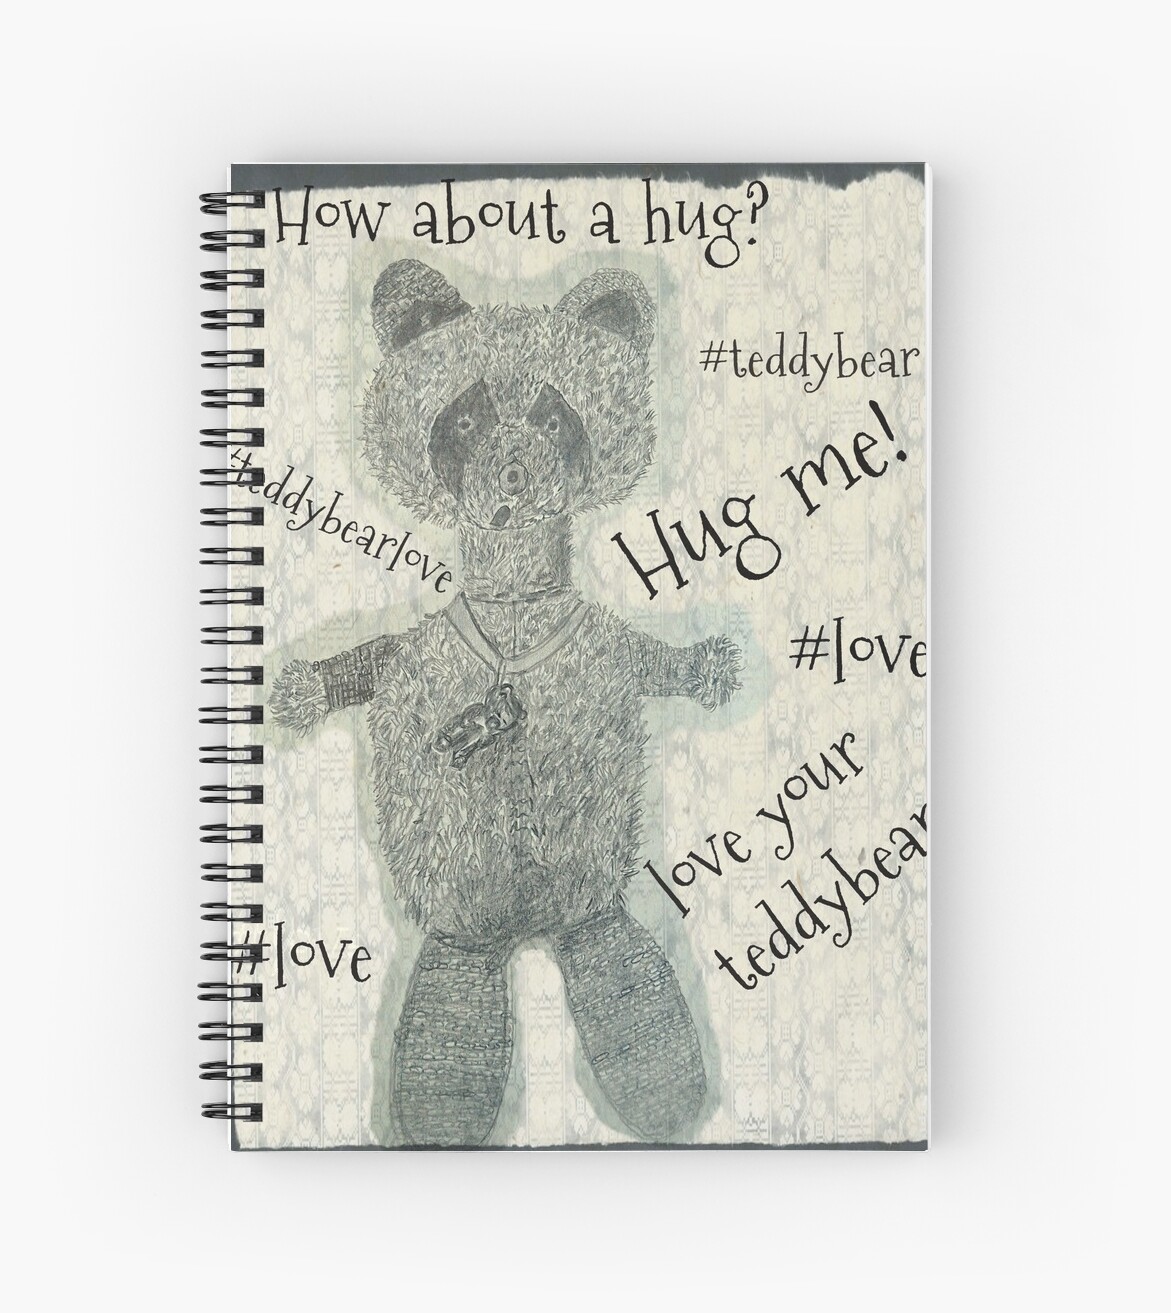 A Teddy Bear Drawing With Captions by IvanaKada